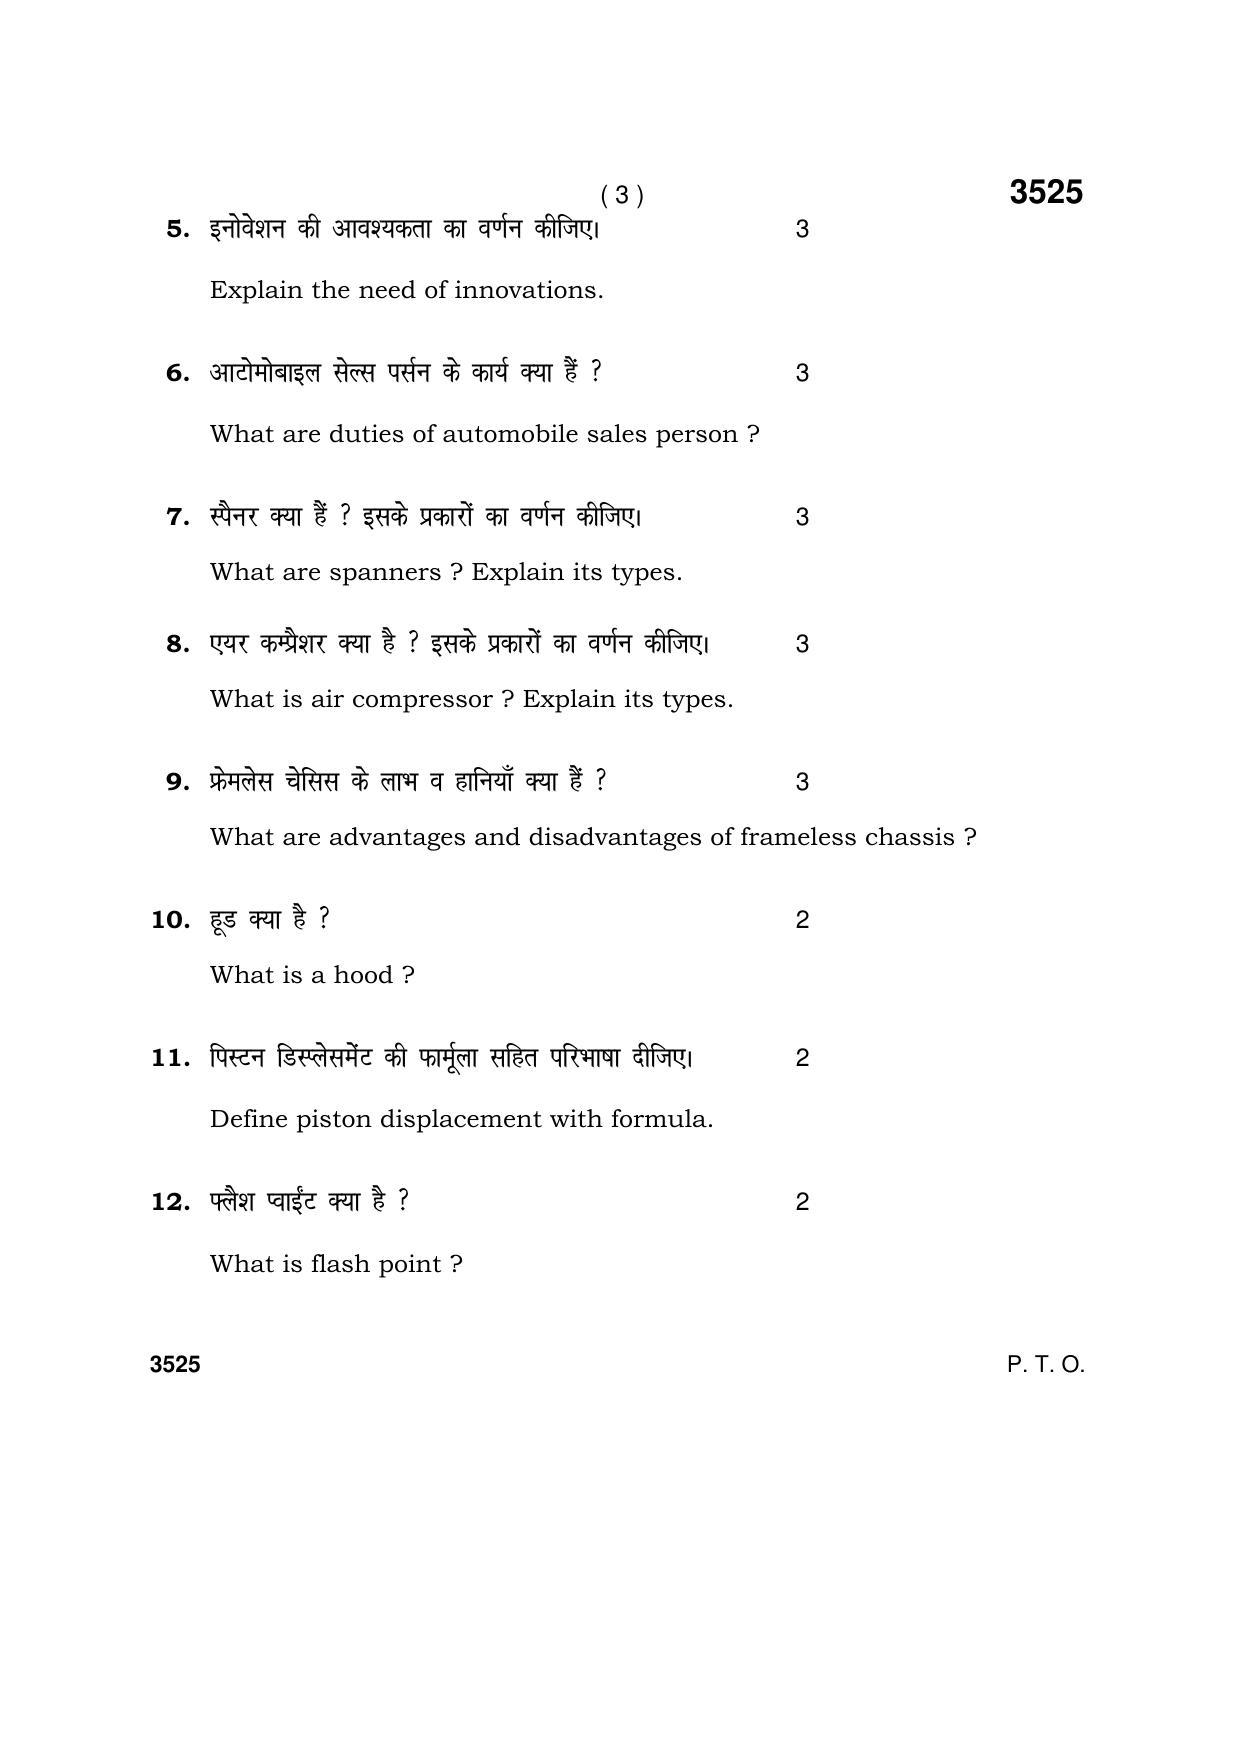 Haryana Board HBSE Class 10 Automobile 2018 Question Paper - Page 3